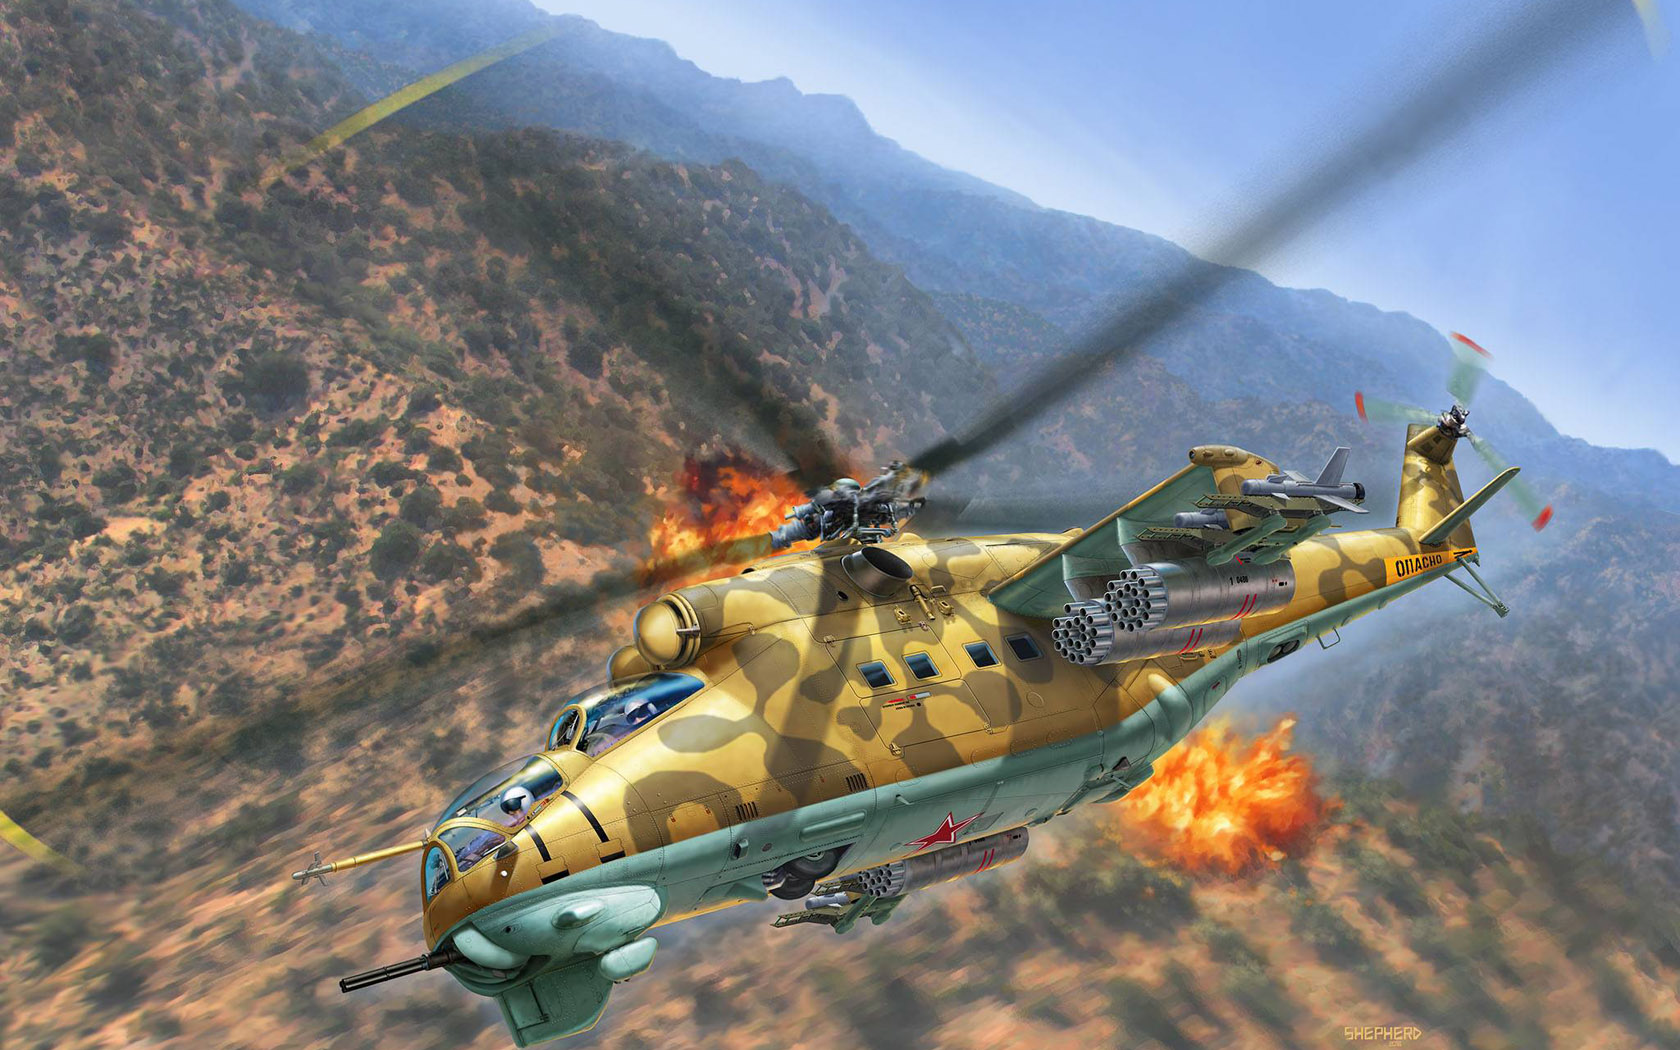 General 1680x1050 aircraft flying fire army military military vehicle artwork explosion landscape mountains Mil Mi-24 Russian Army signature Russian/Soviet aircraft attack helicopters sky dogfight